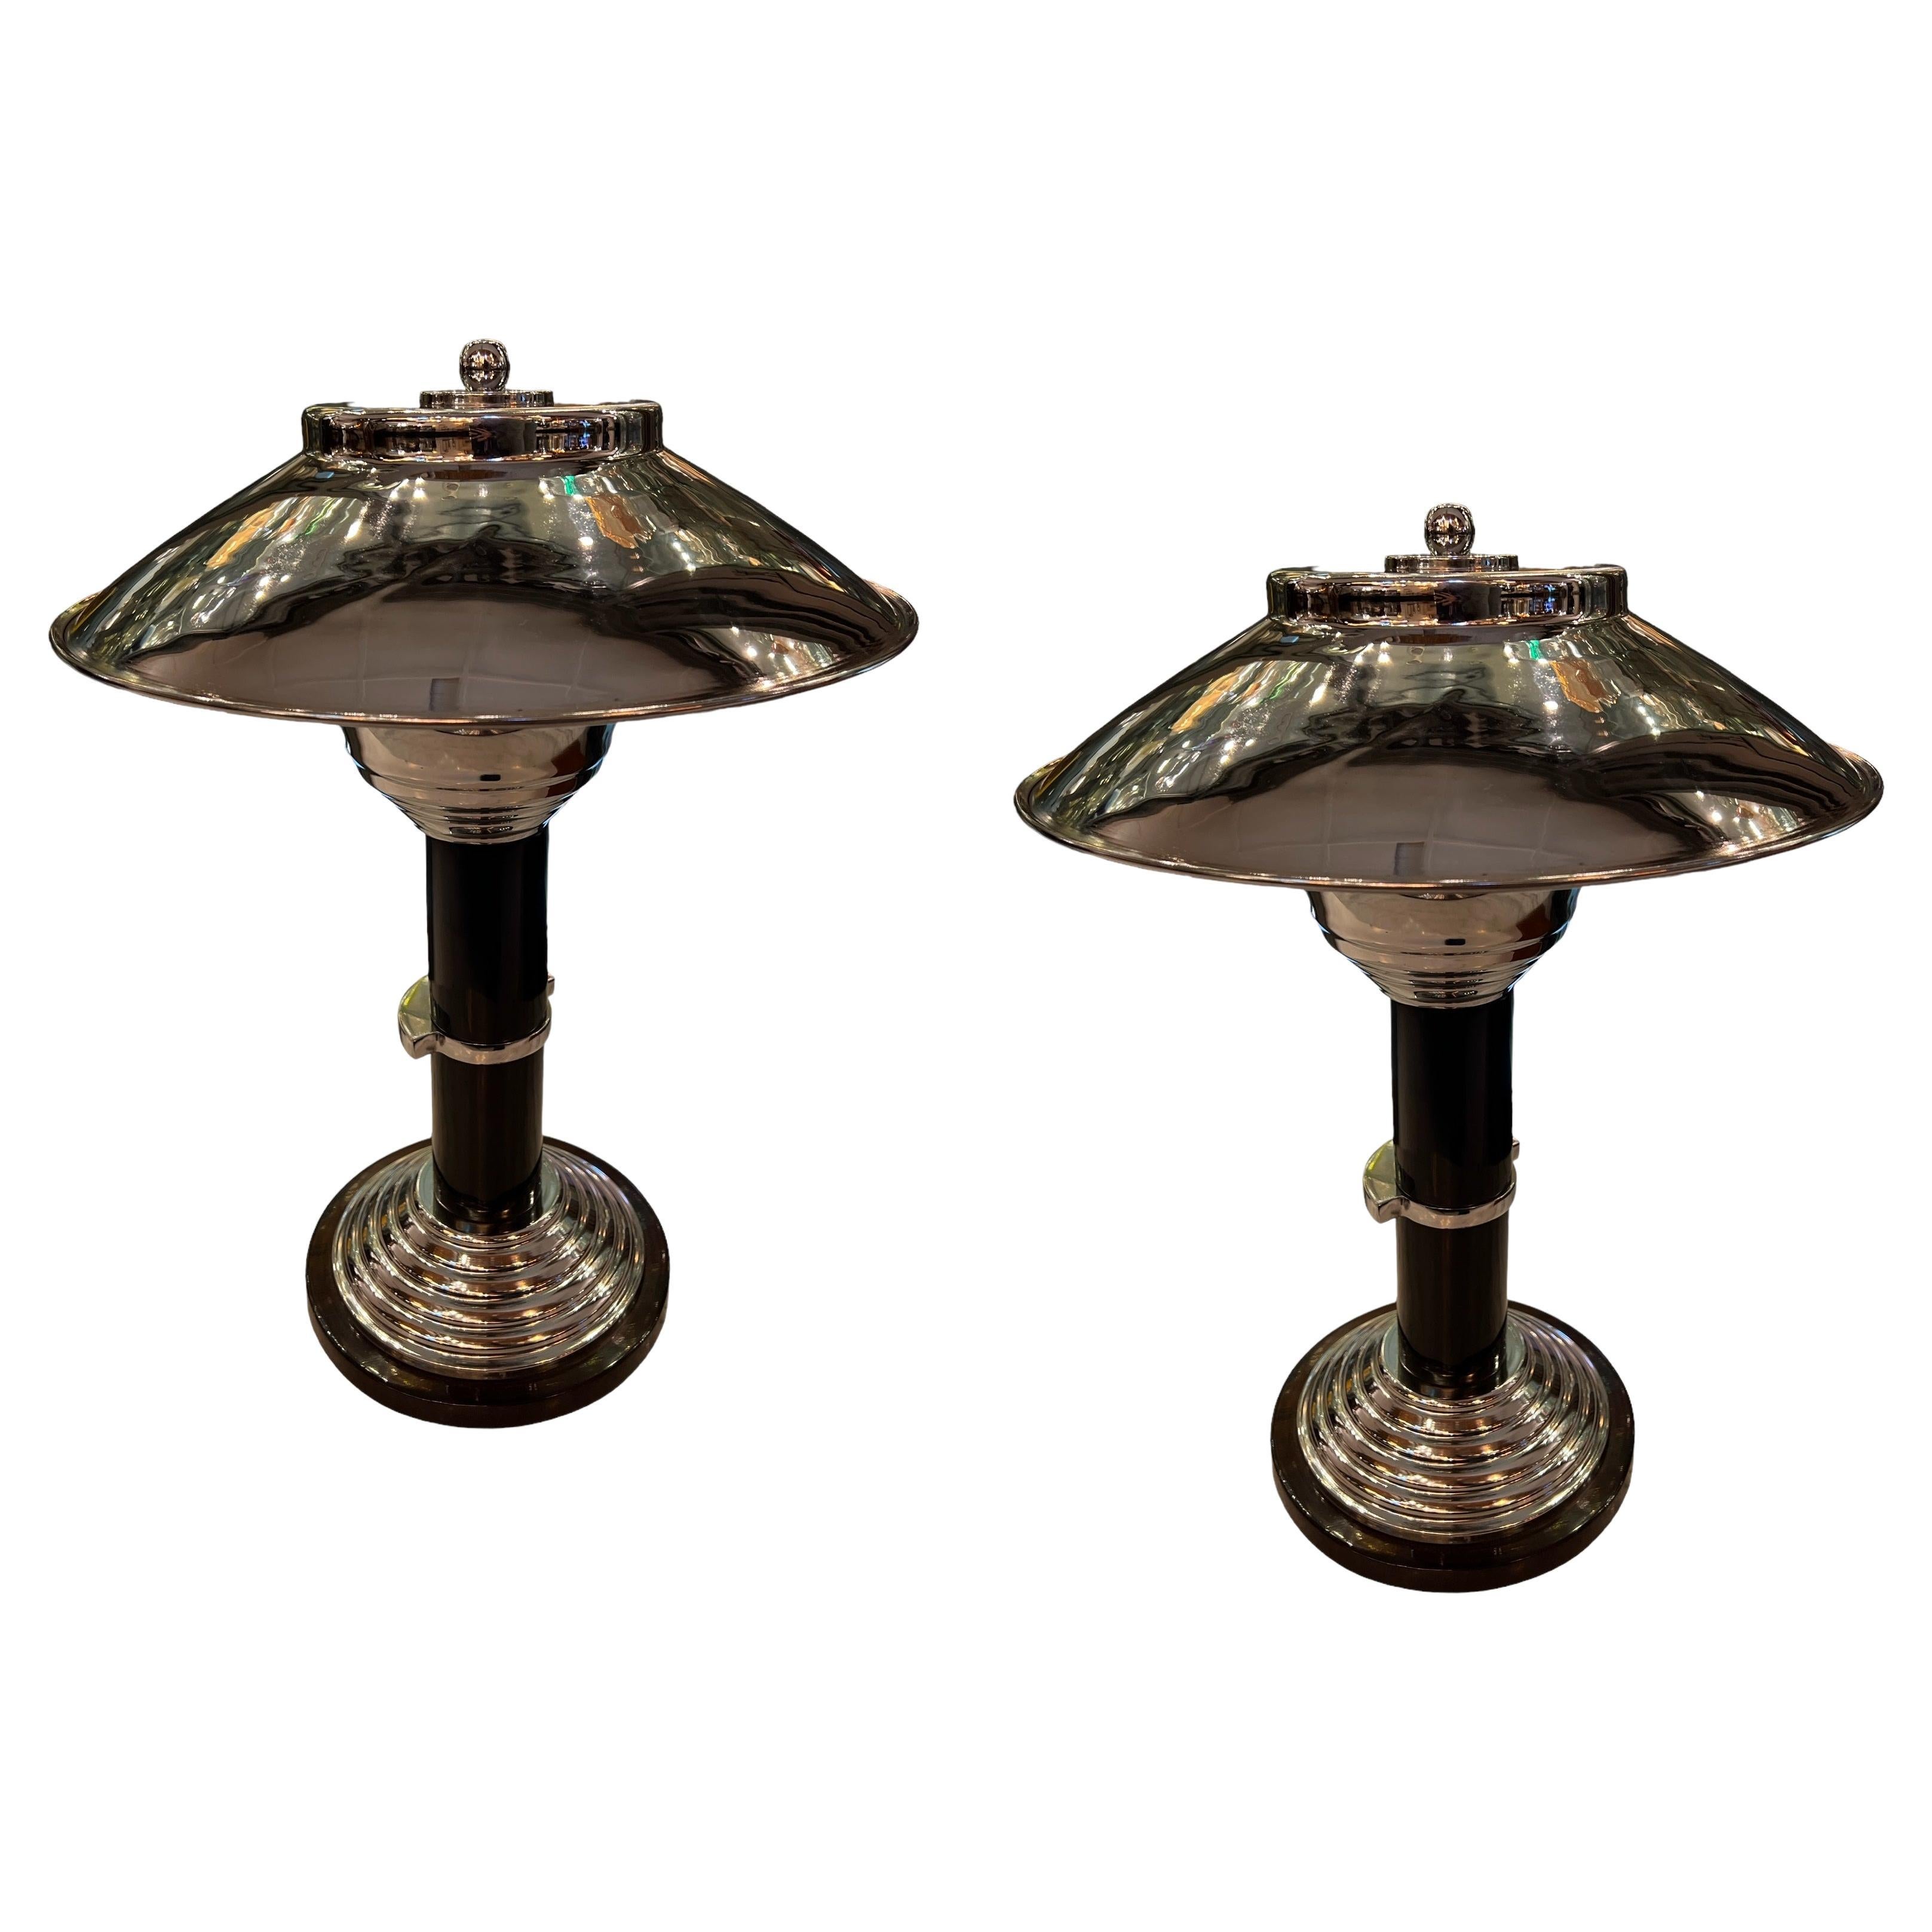 Pair of Art Deco Table Lamps in wood and chrome, France, 1930